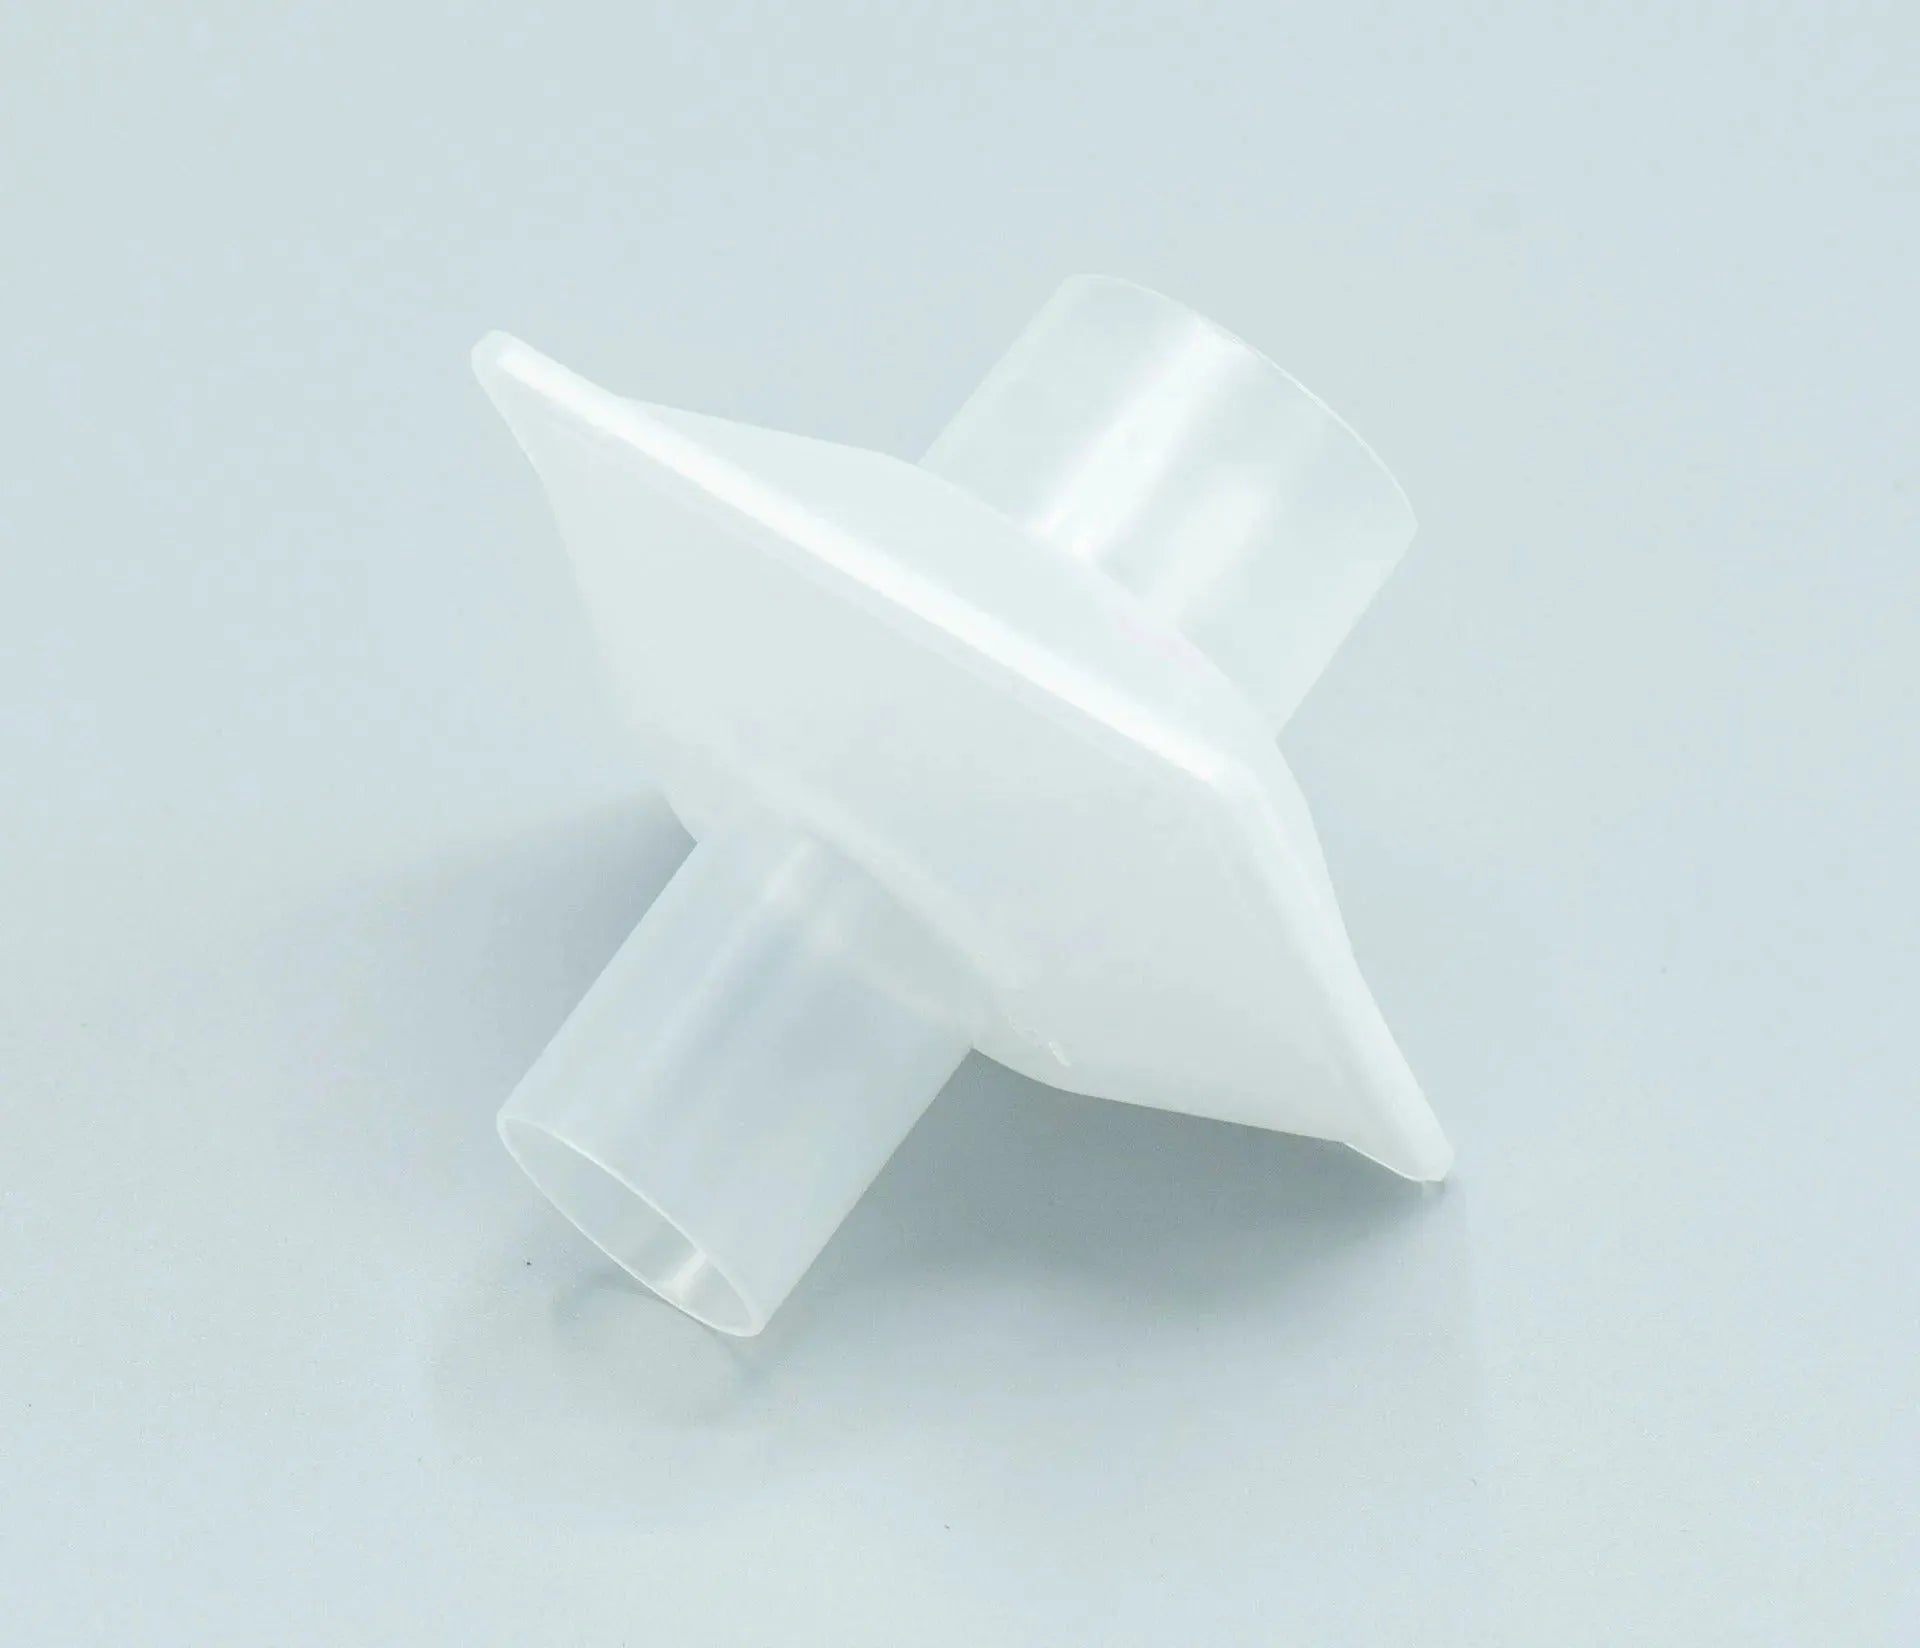 Eco Office Spiro Bacterial/Viral Filter is white translucent in color.